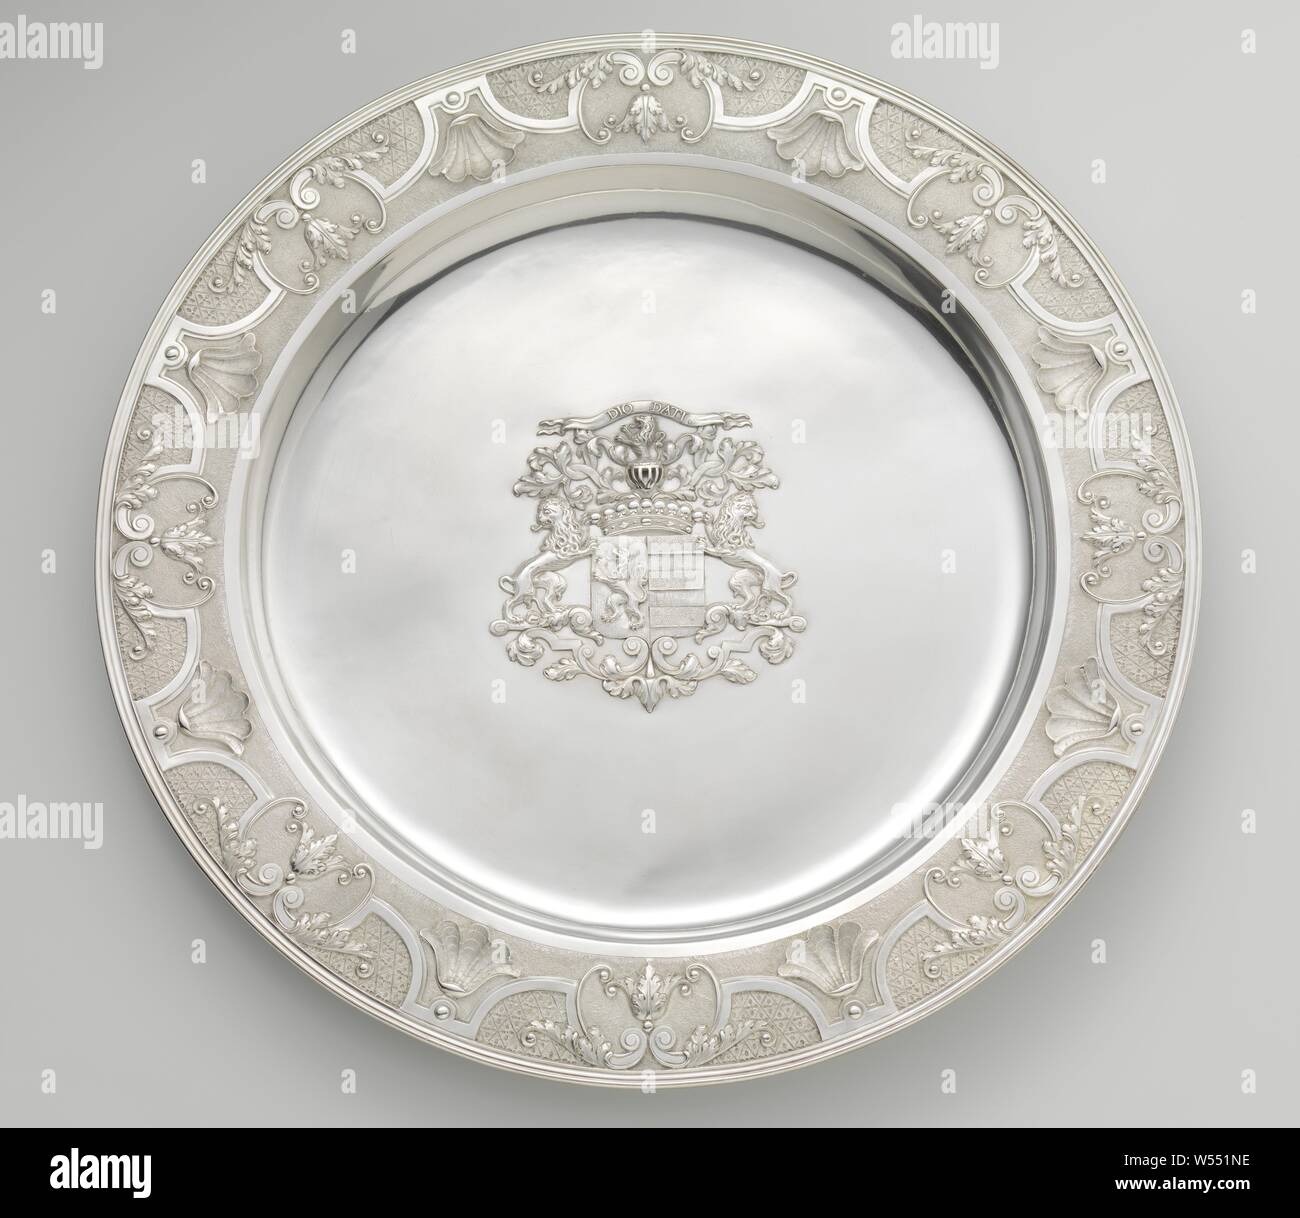 Communion set Supper dish, Supper dish of silver. The border is decorated with Louis XIV ornament borders. The appliqued weapon of Philip Diodati, armorial bearing, heraldry, is mounted in the center of the shelf, Dirk Wor (attributed to), Dordrecht, 1736, silver (metal), d 50.2 cm Stock Photo